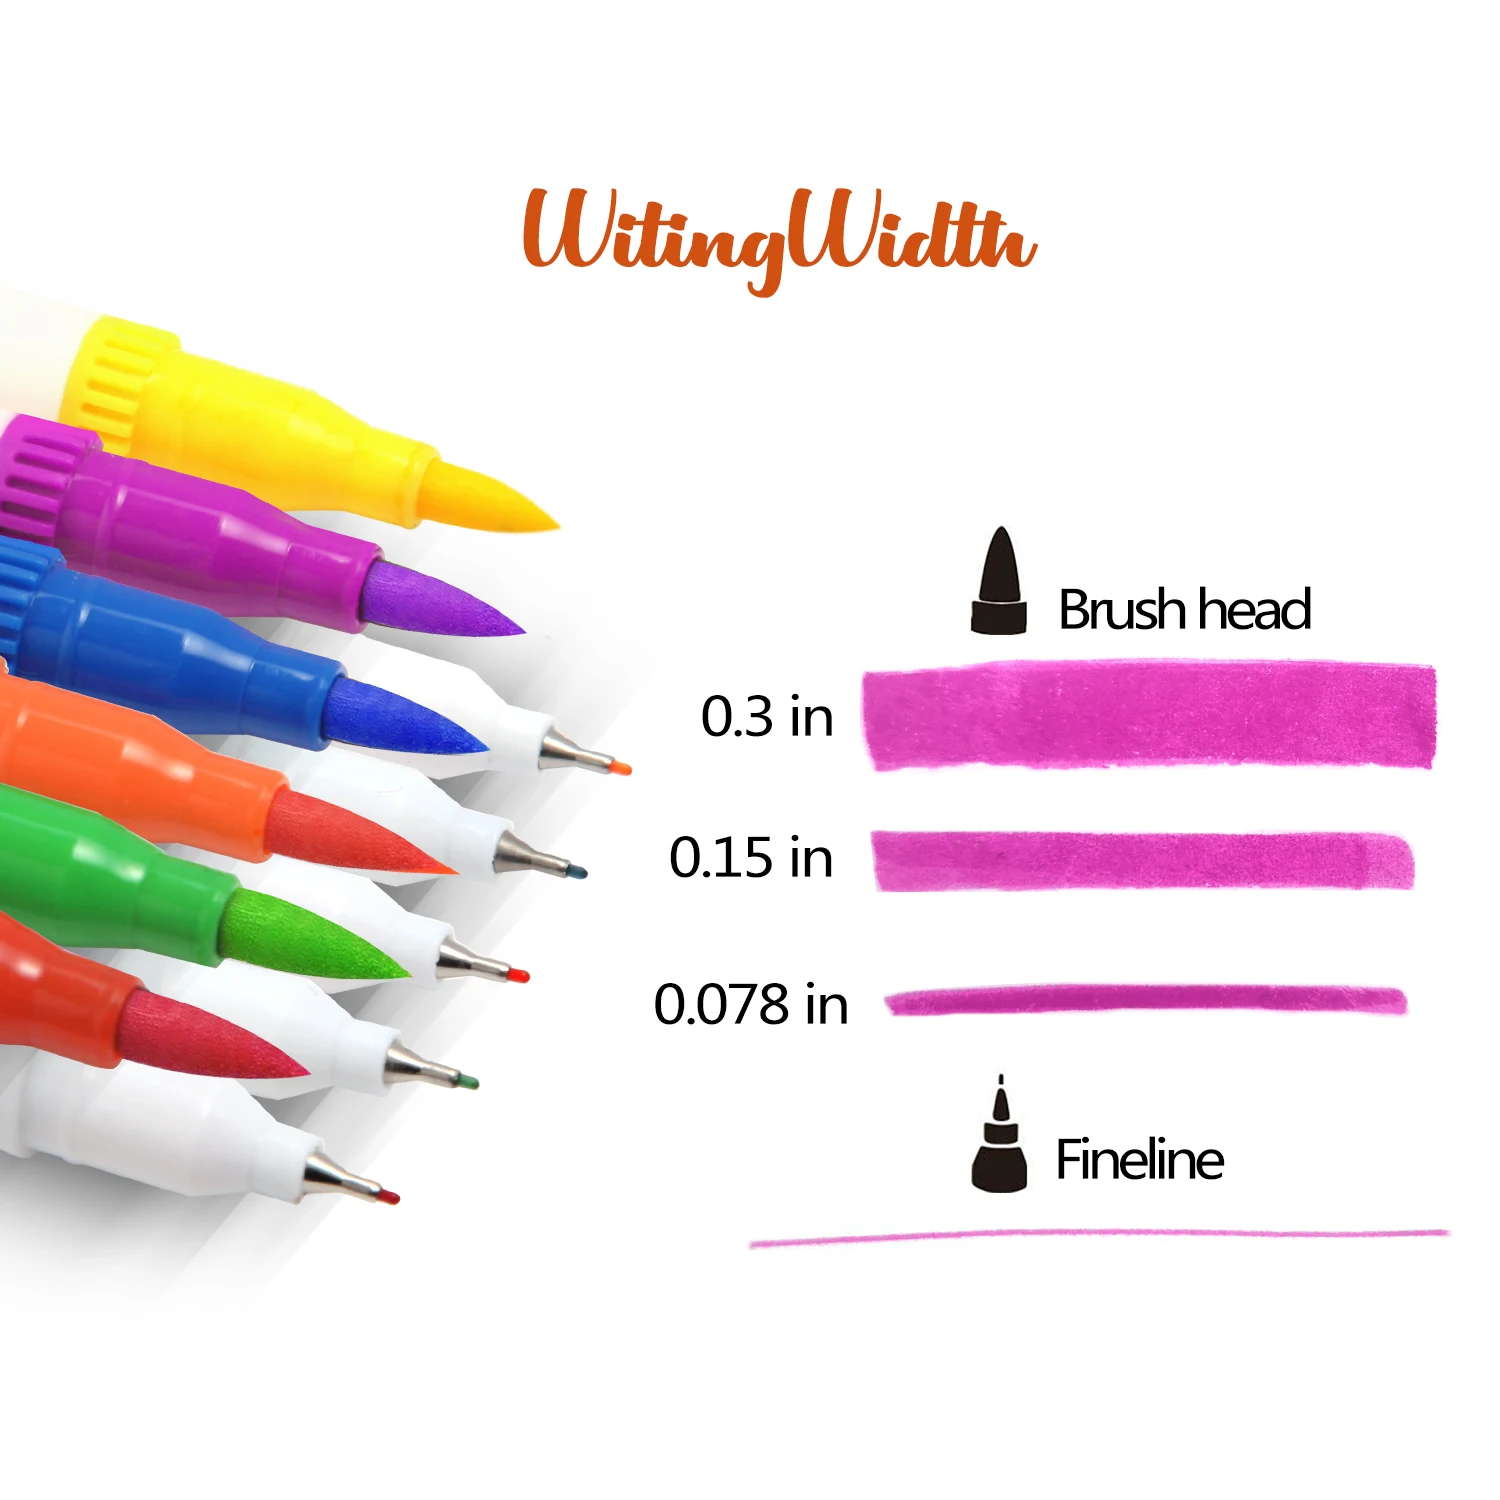 12-160 Colors Brush Pens Markers Set Dual Tips Fine Drawing Adult Coloring  Books Sketching Planner